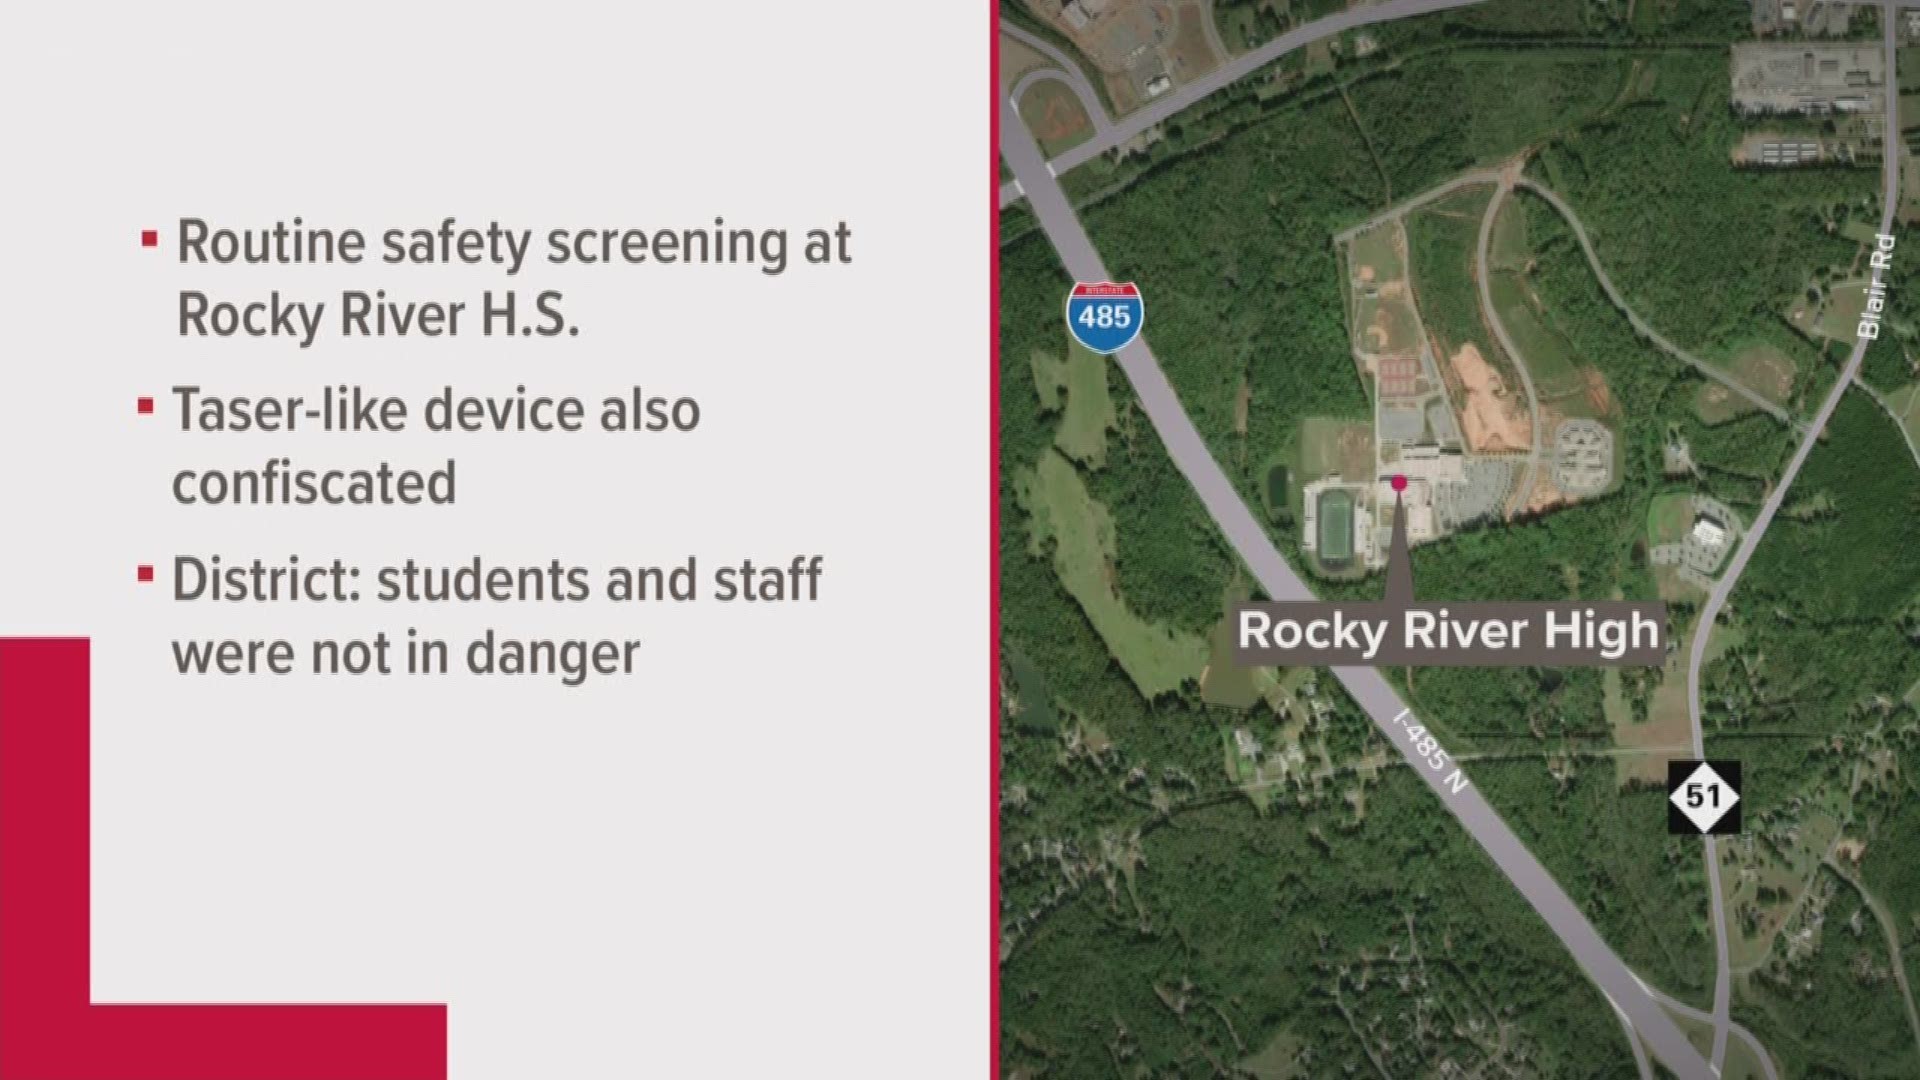 During the routine safety screening at Rocky River High School Wednesday morning, one loaded firearm was located by a CMS-PD canine firearms detection team.